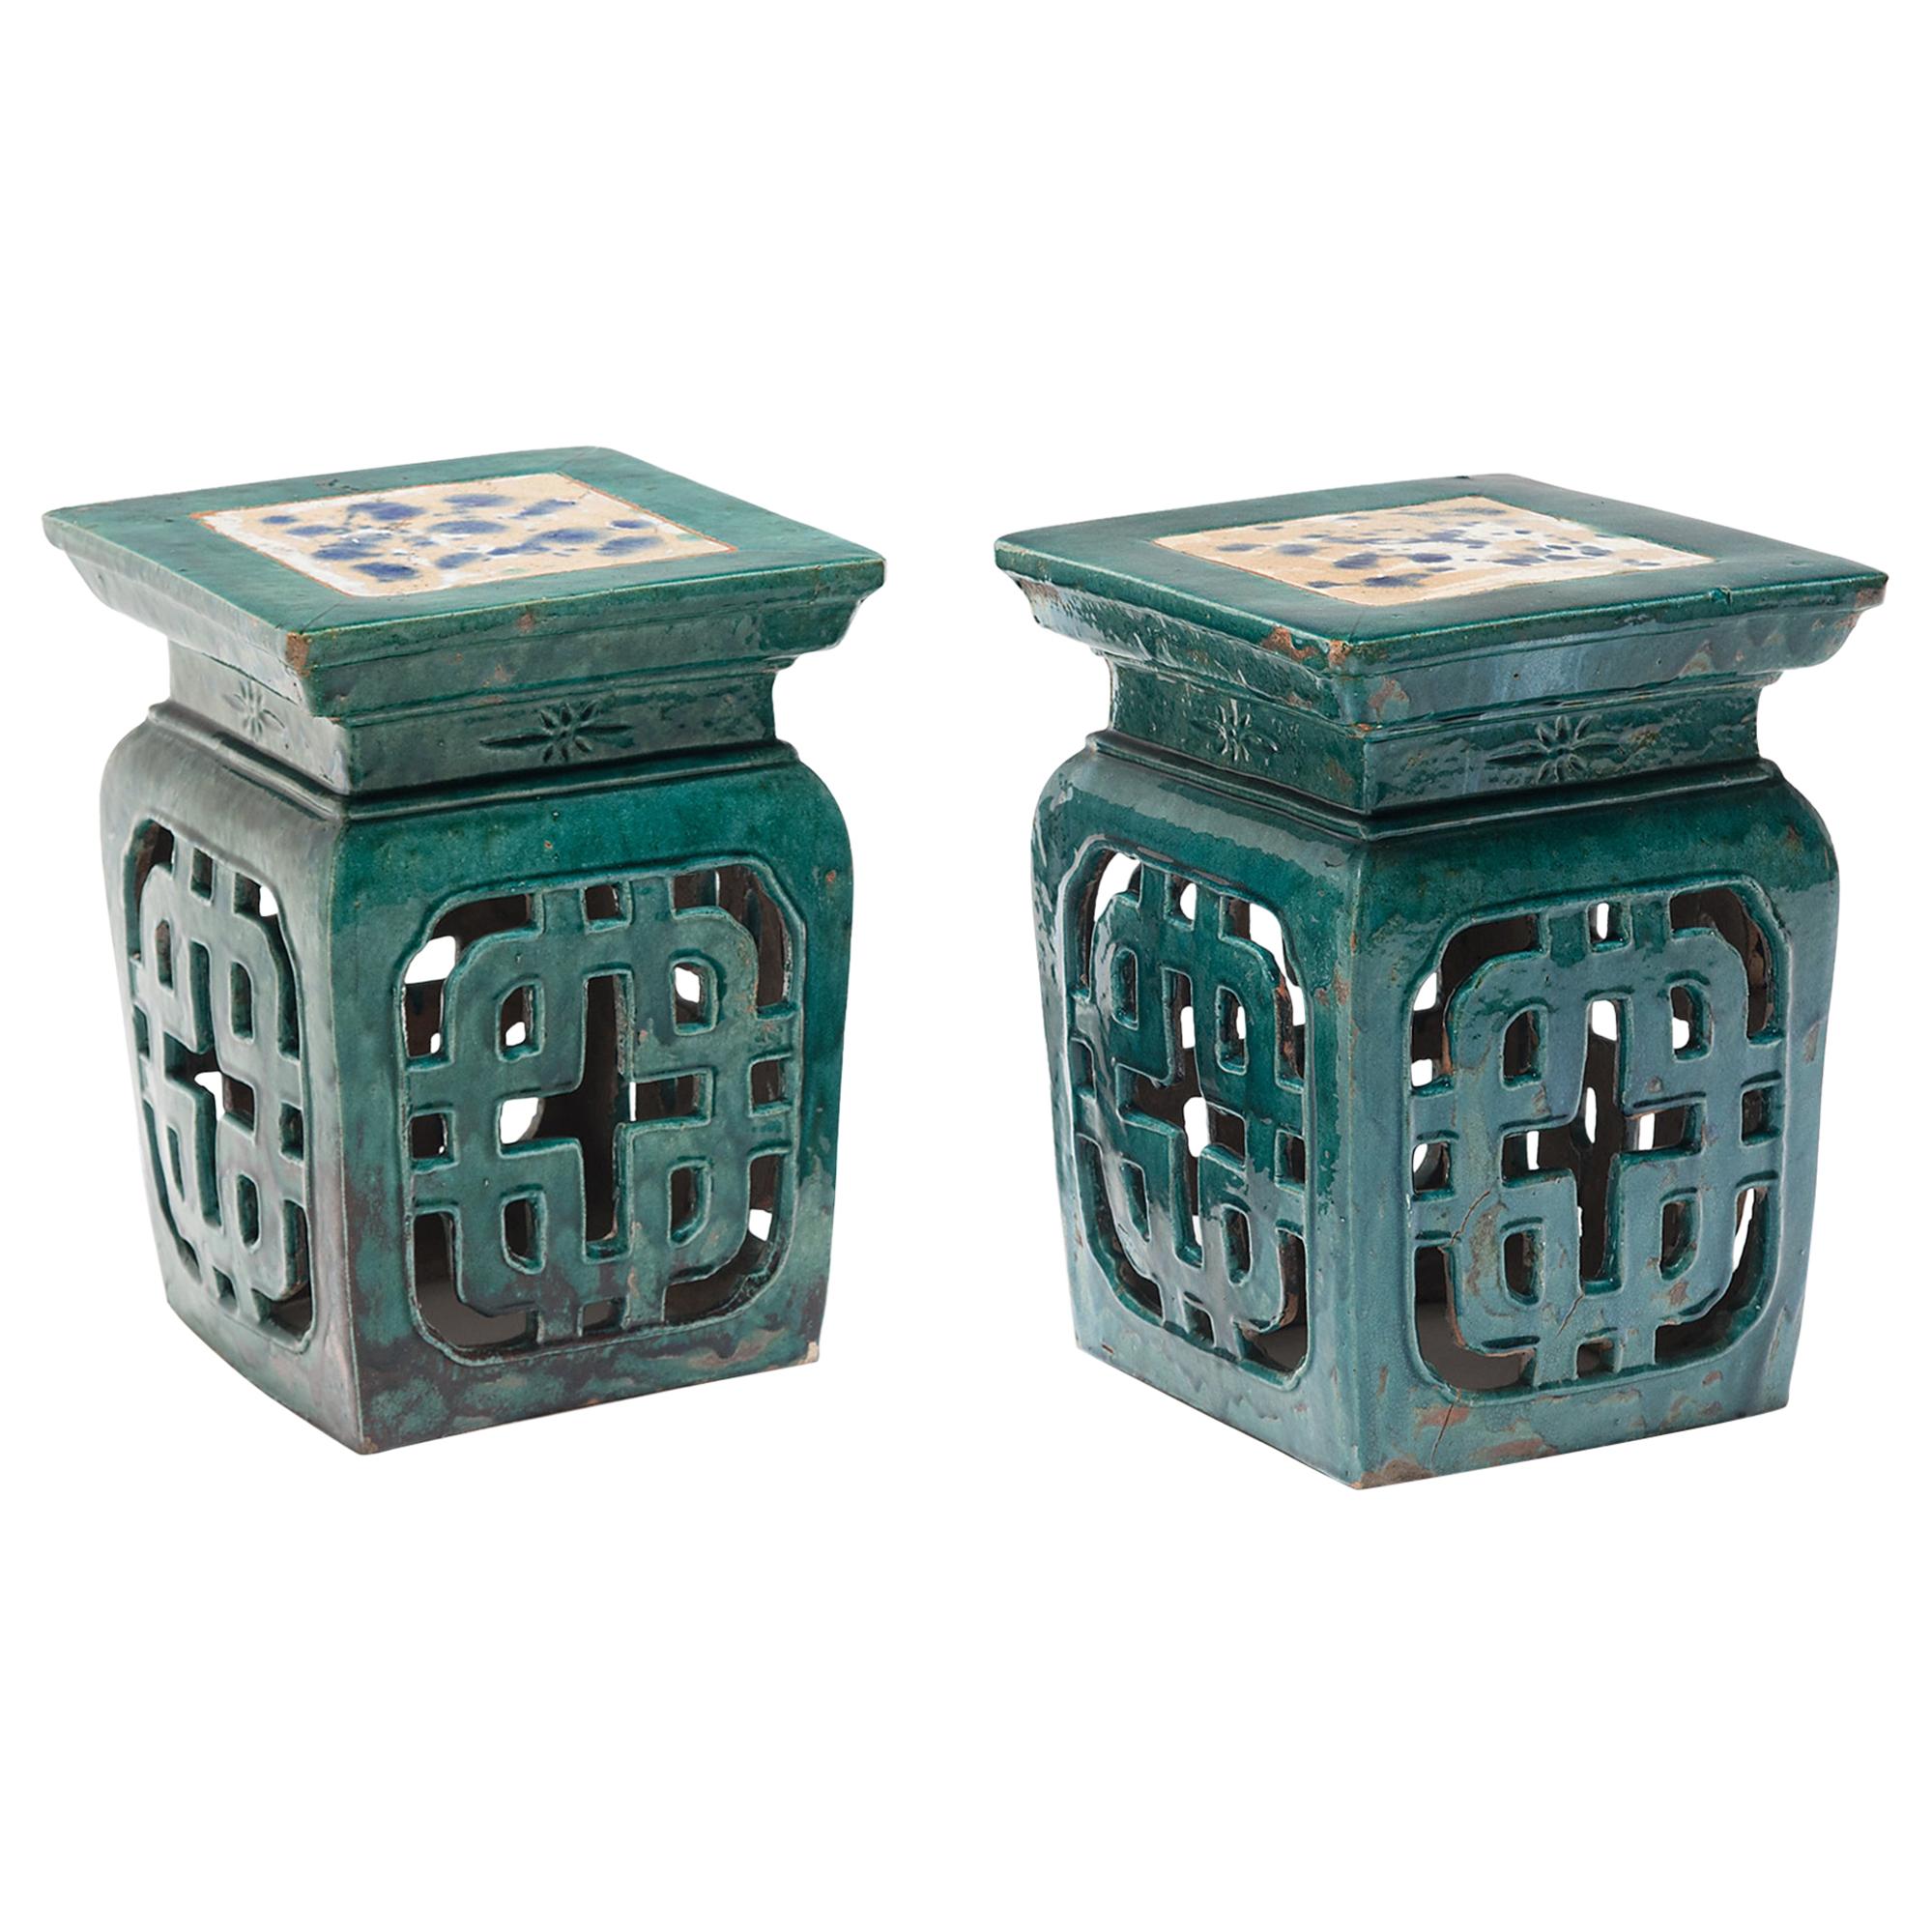 Pair of Chinese Green Glazed Garden Seats, c. 1900